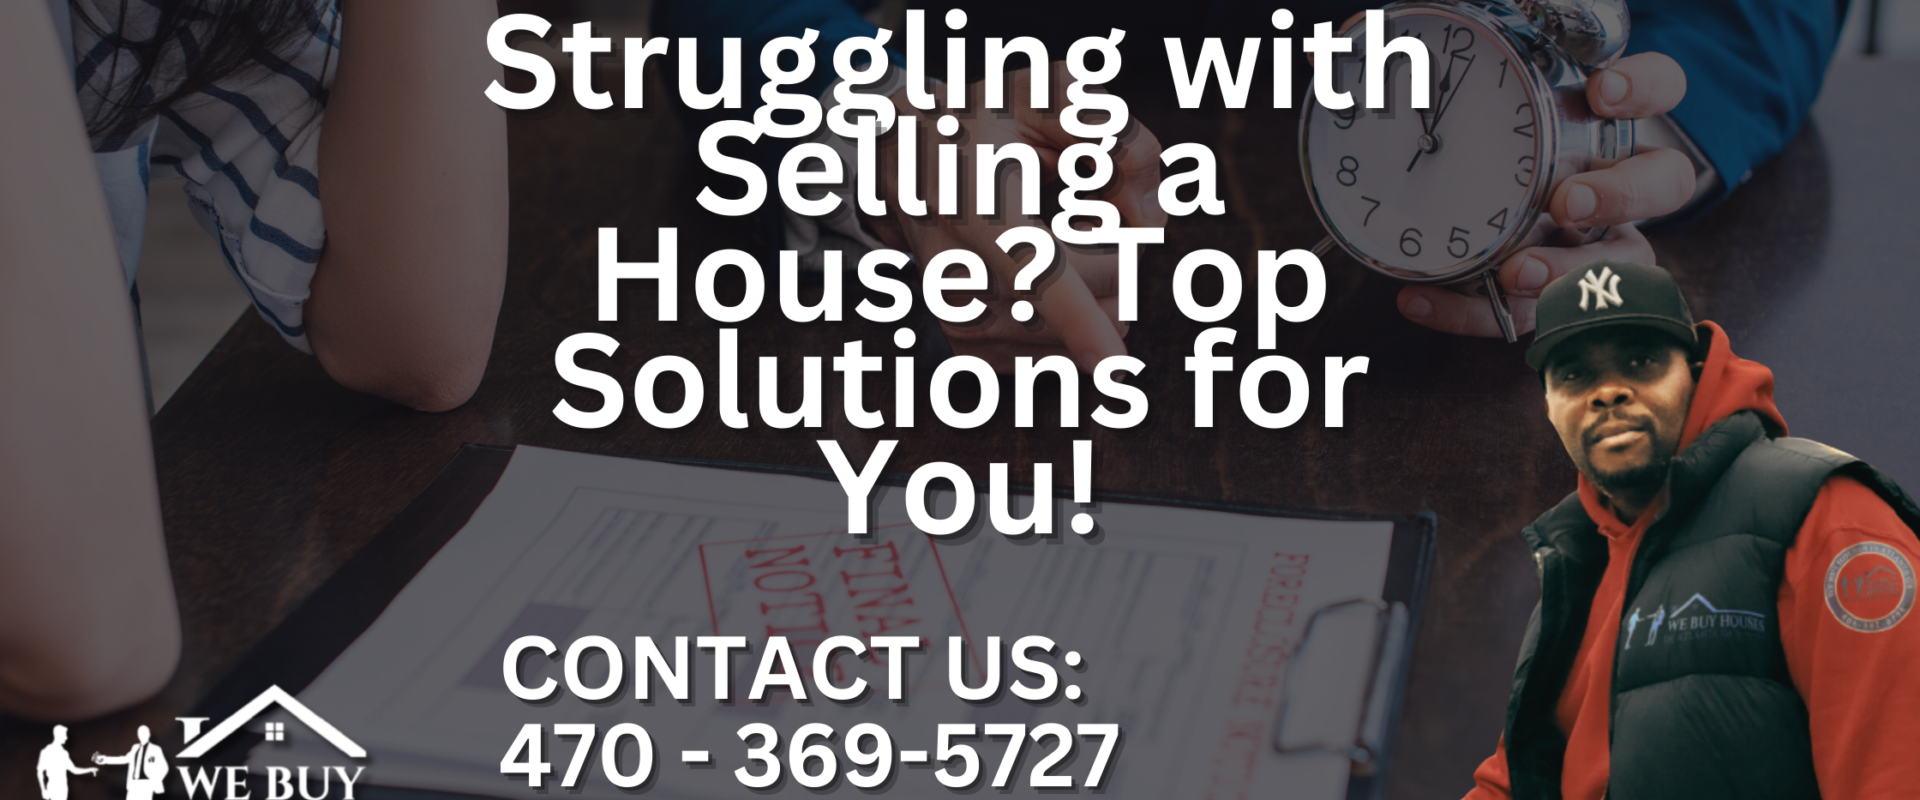 Struggling with Selling a House? Top Solutions for You!